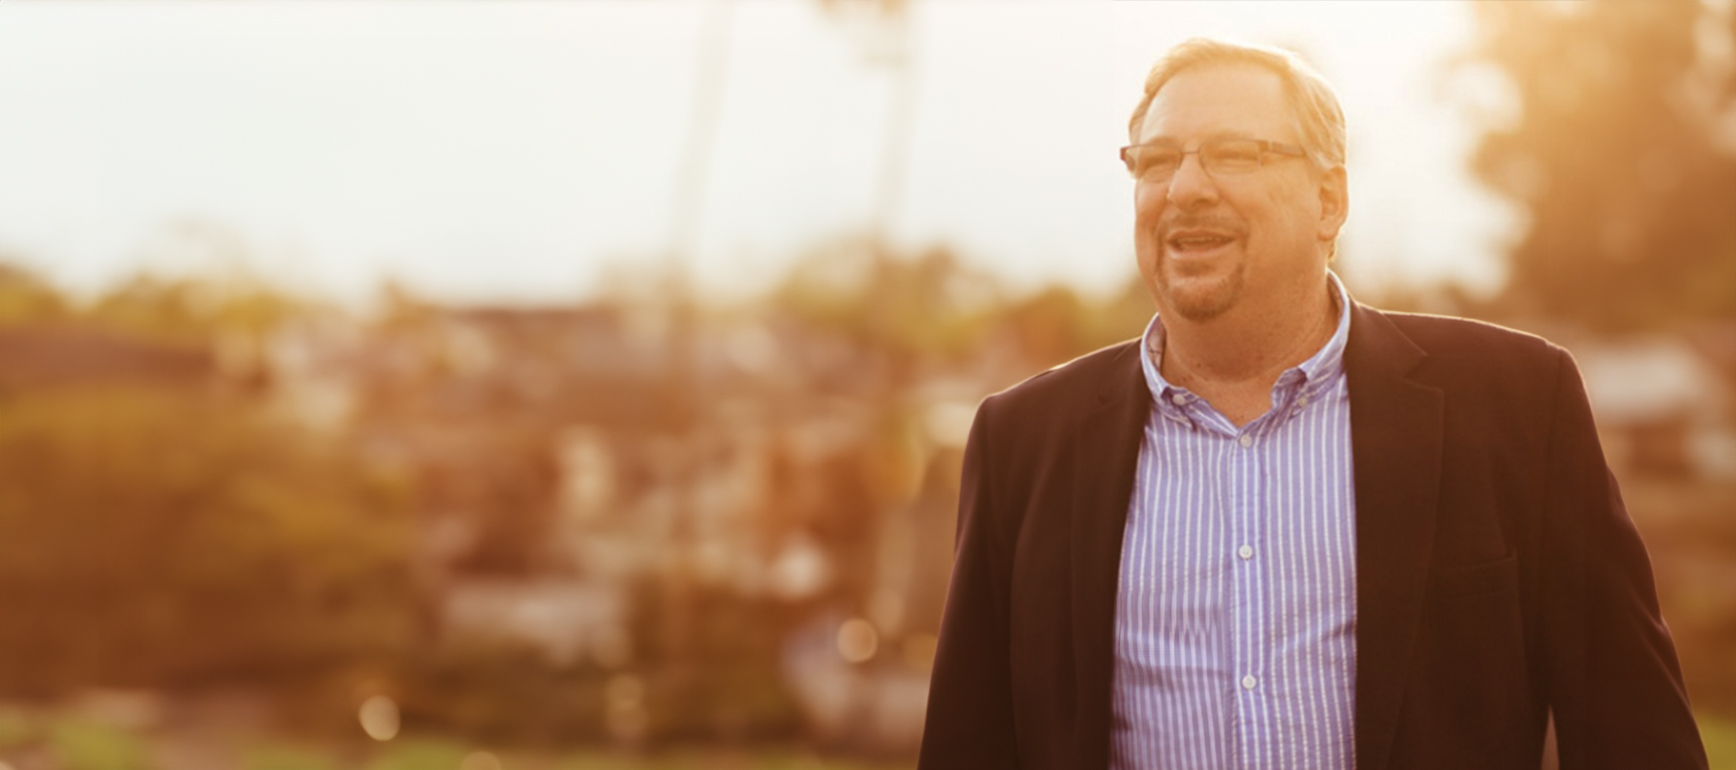 Reflections On The Life And Ministry Of Pastor Chuck Smith – Rick Warren